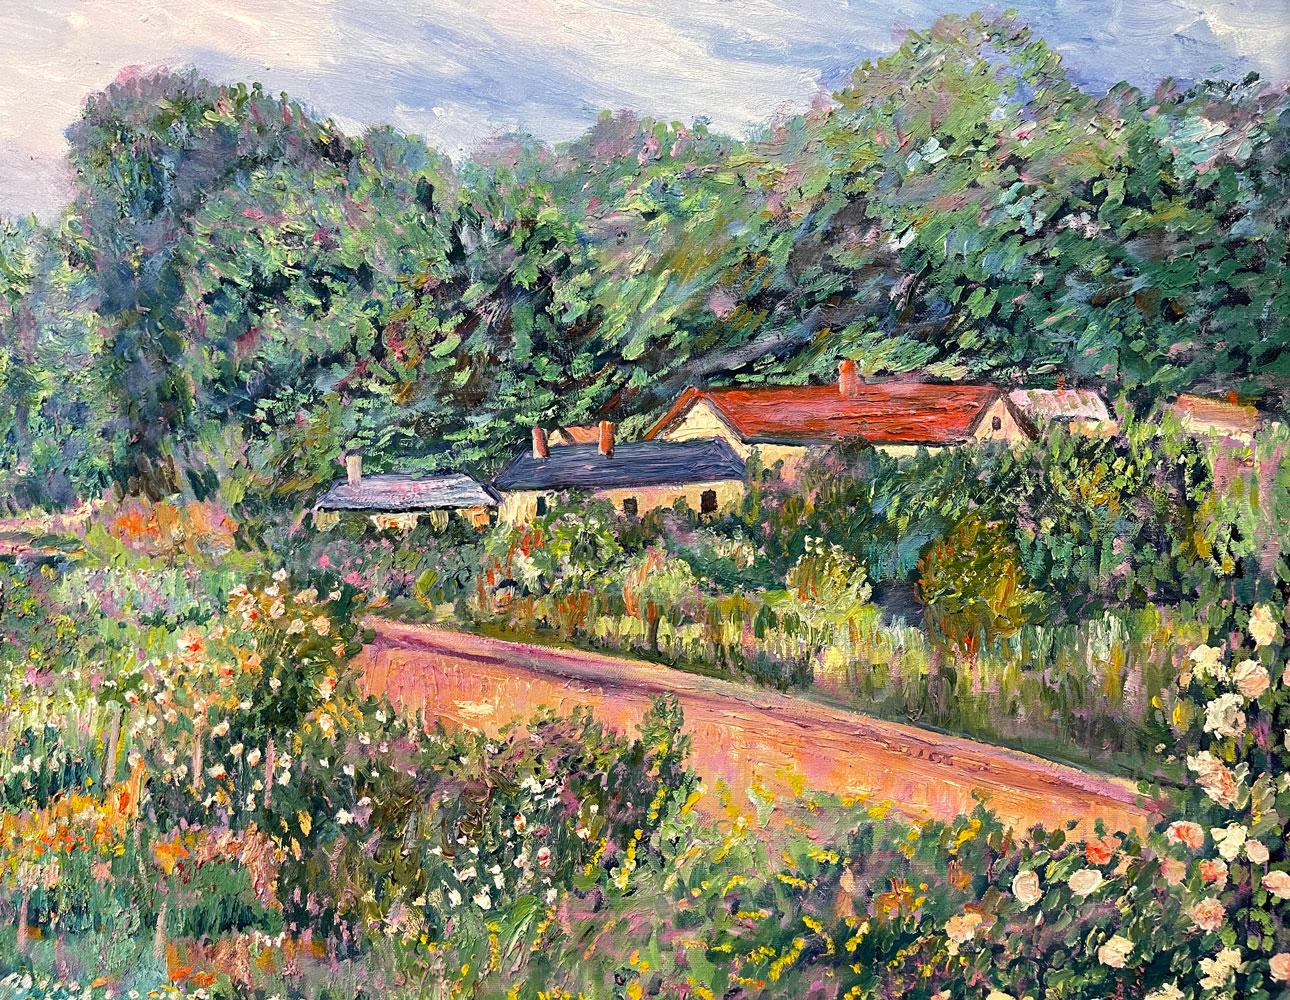 Pink Path Through Garden - Original Oil - Painting by Manor Shadian